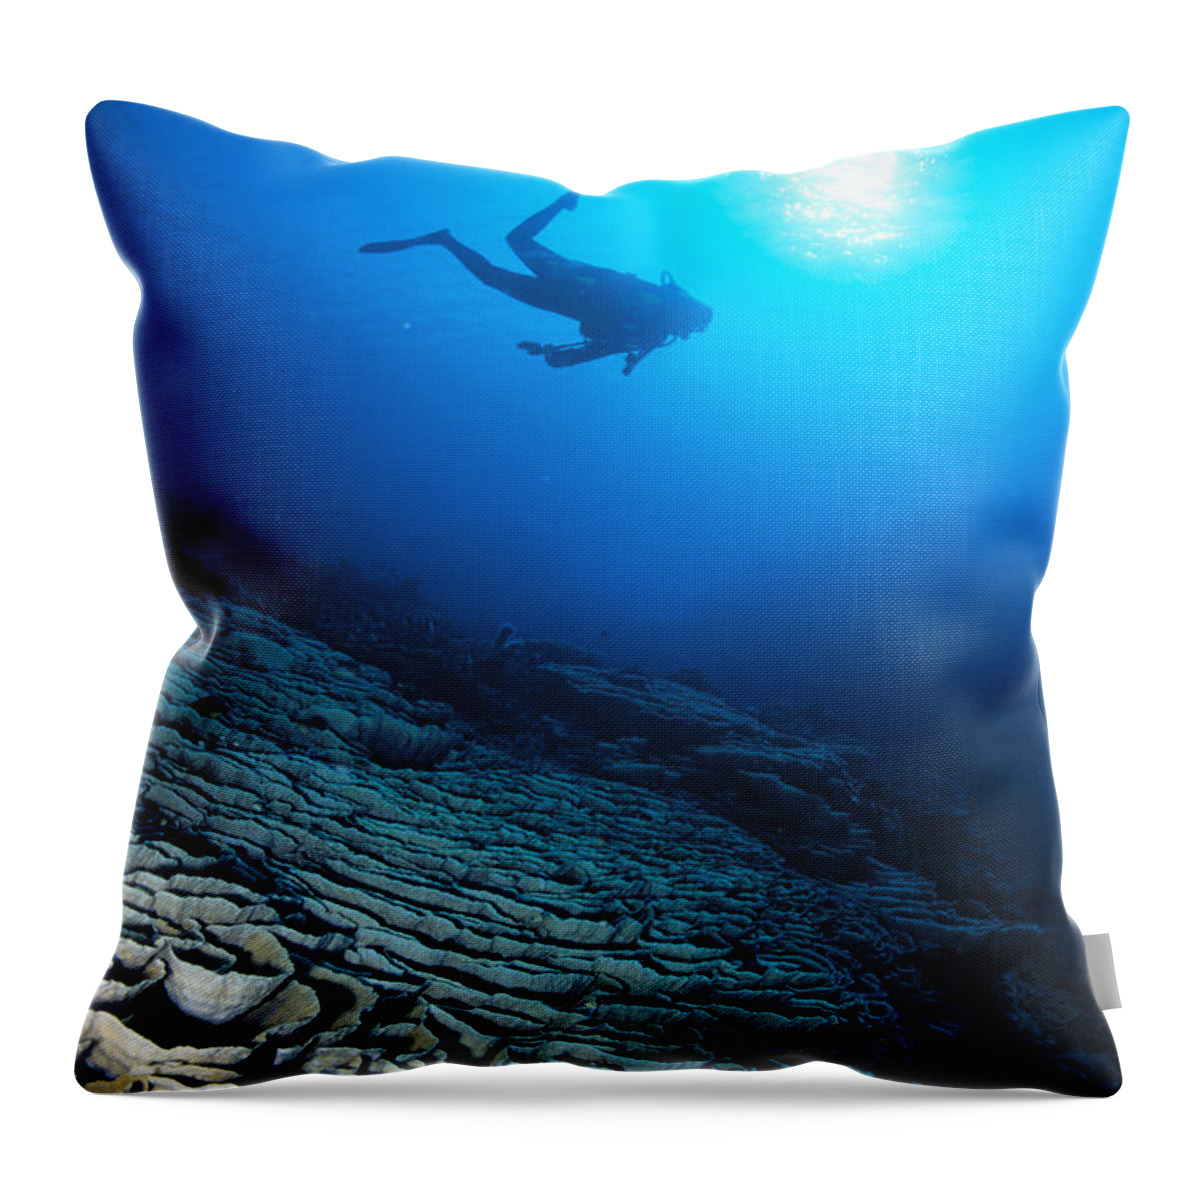 Blue Throw Pillow featuring the photograph Diving Scene #1 by Ed Robinson - Printscapes